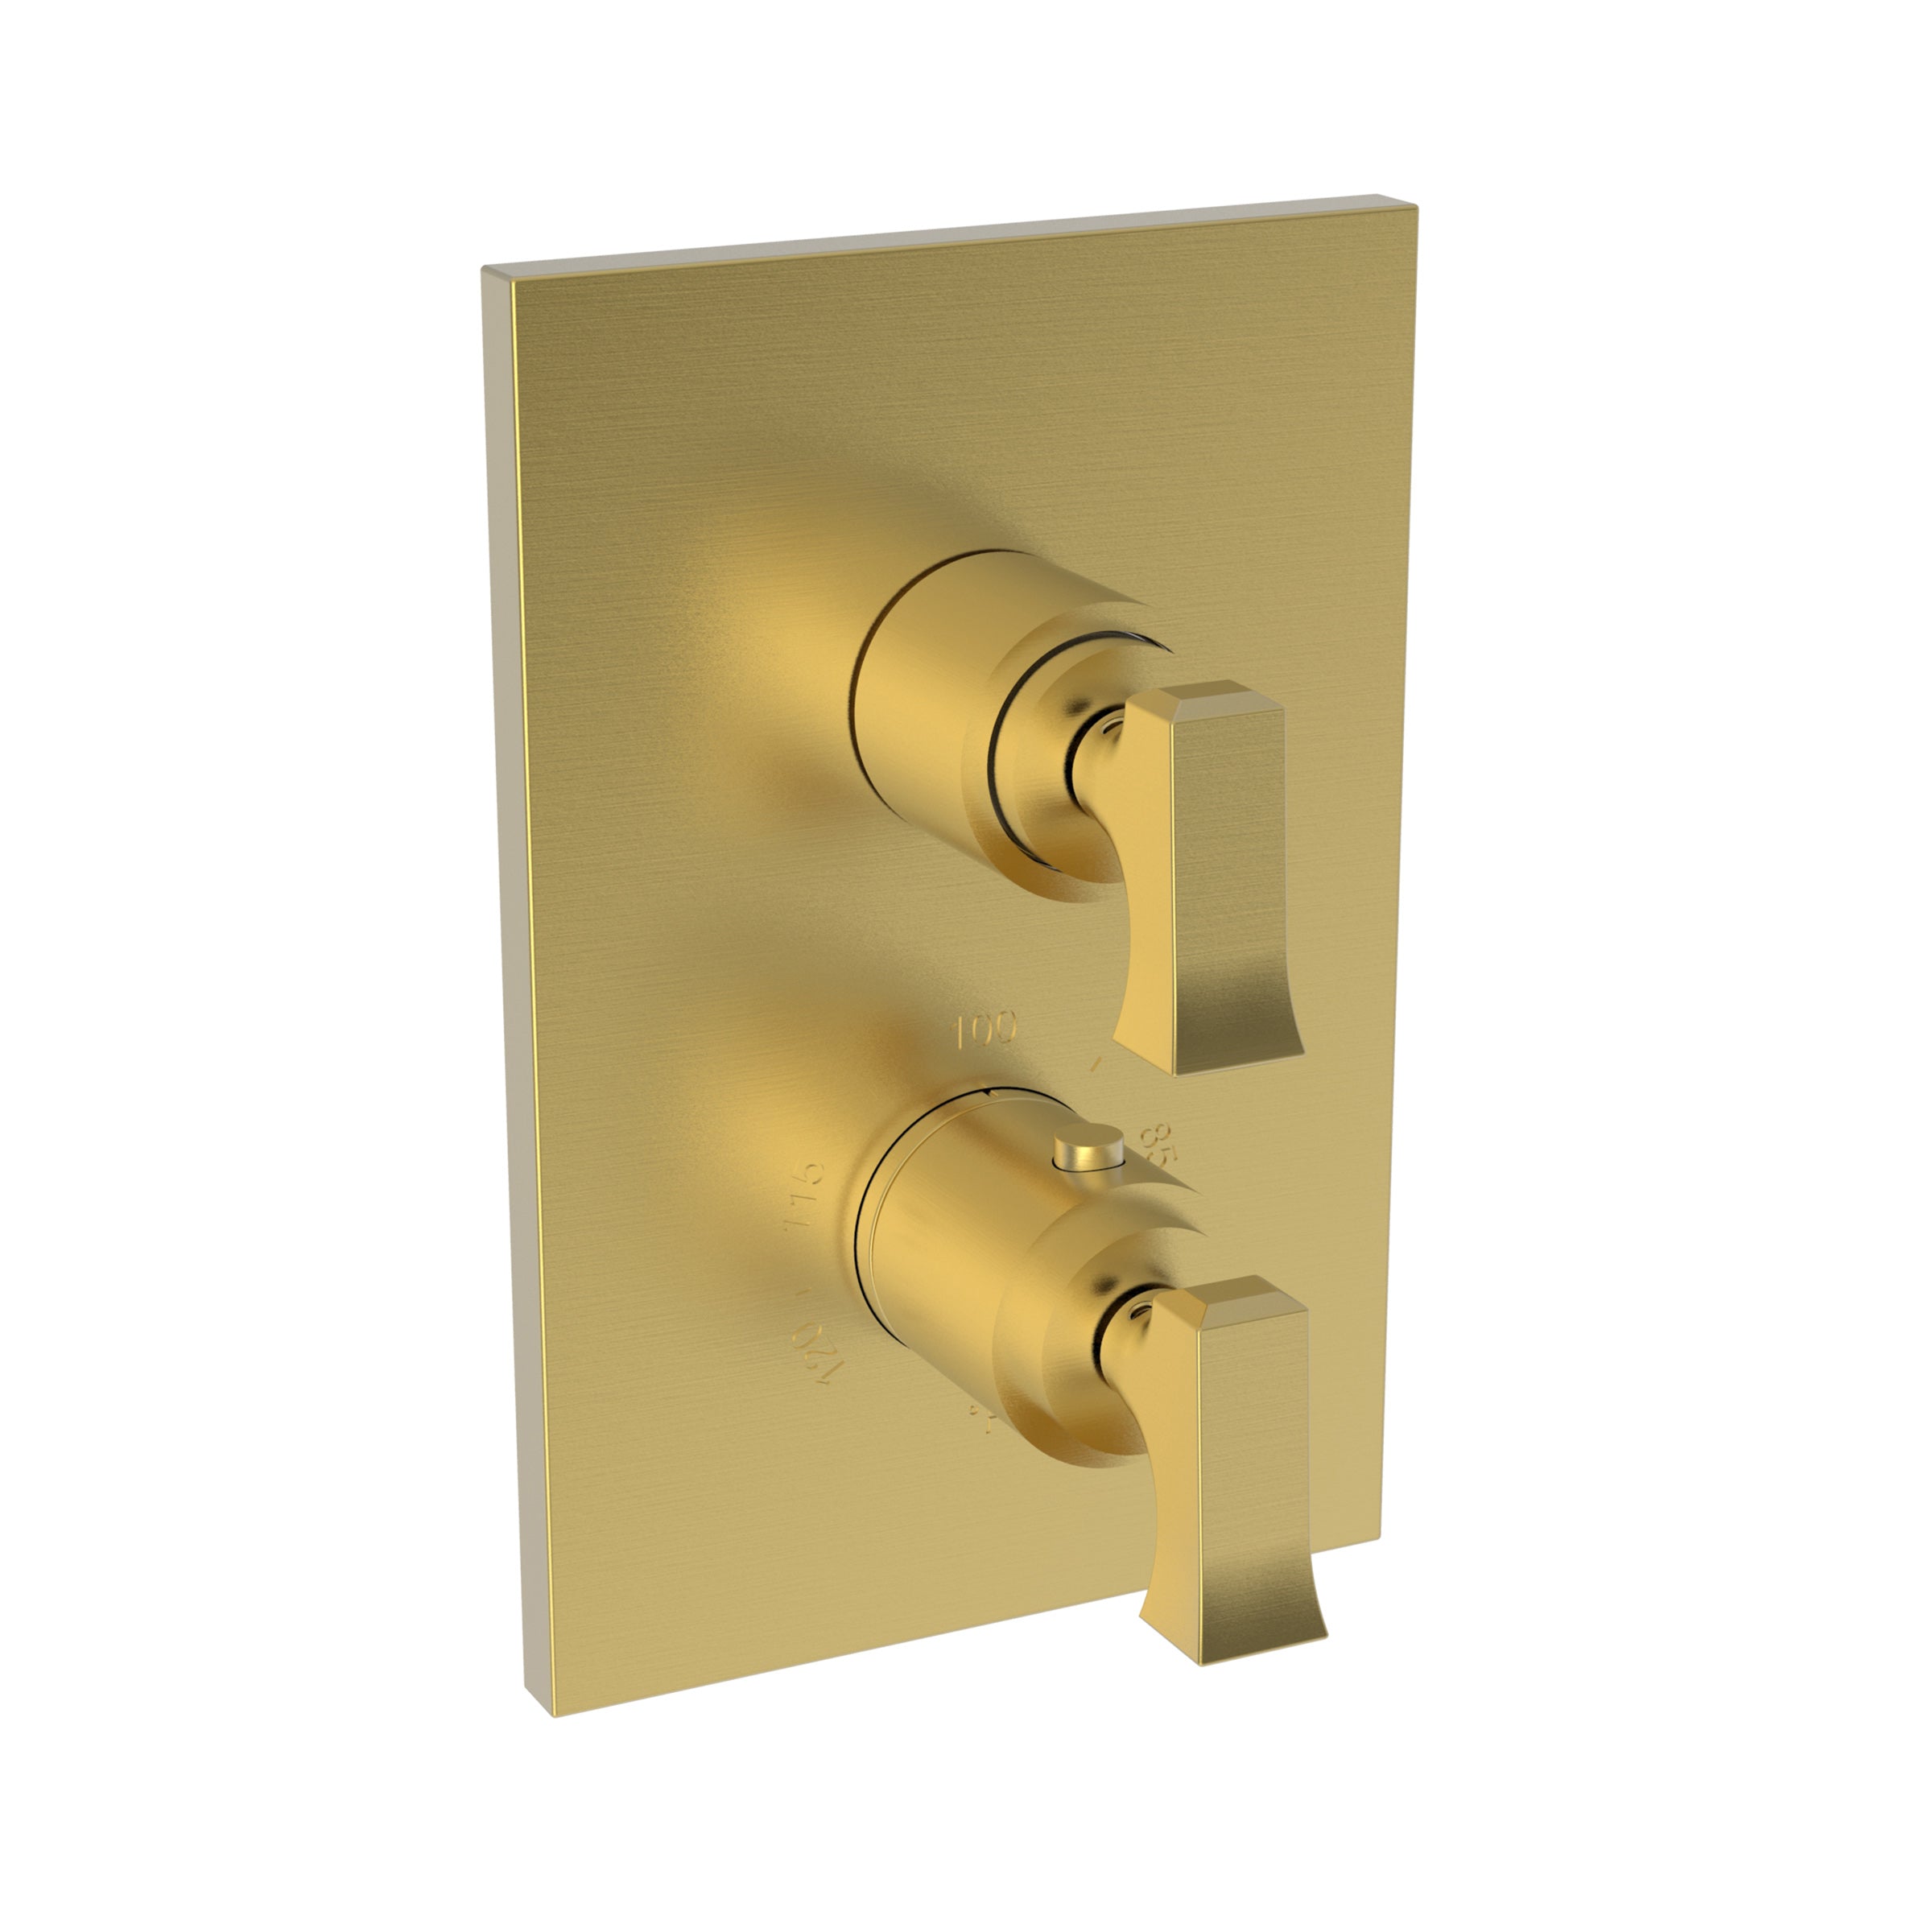 Newport Brass Joffrey 1/2" Square Thermostatic Trim Plate with Handle